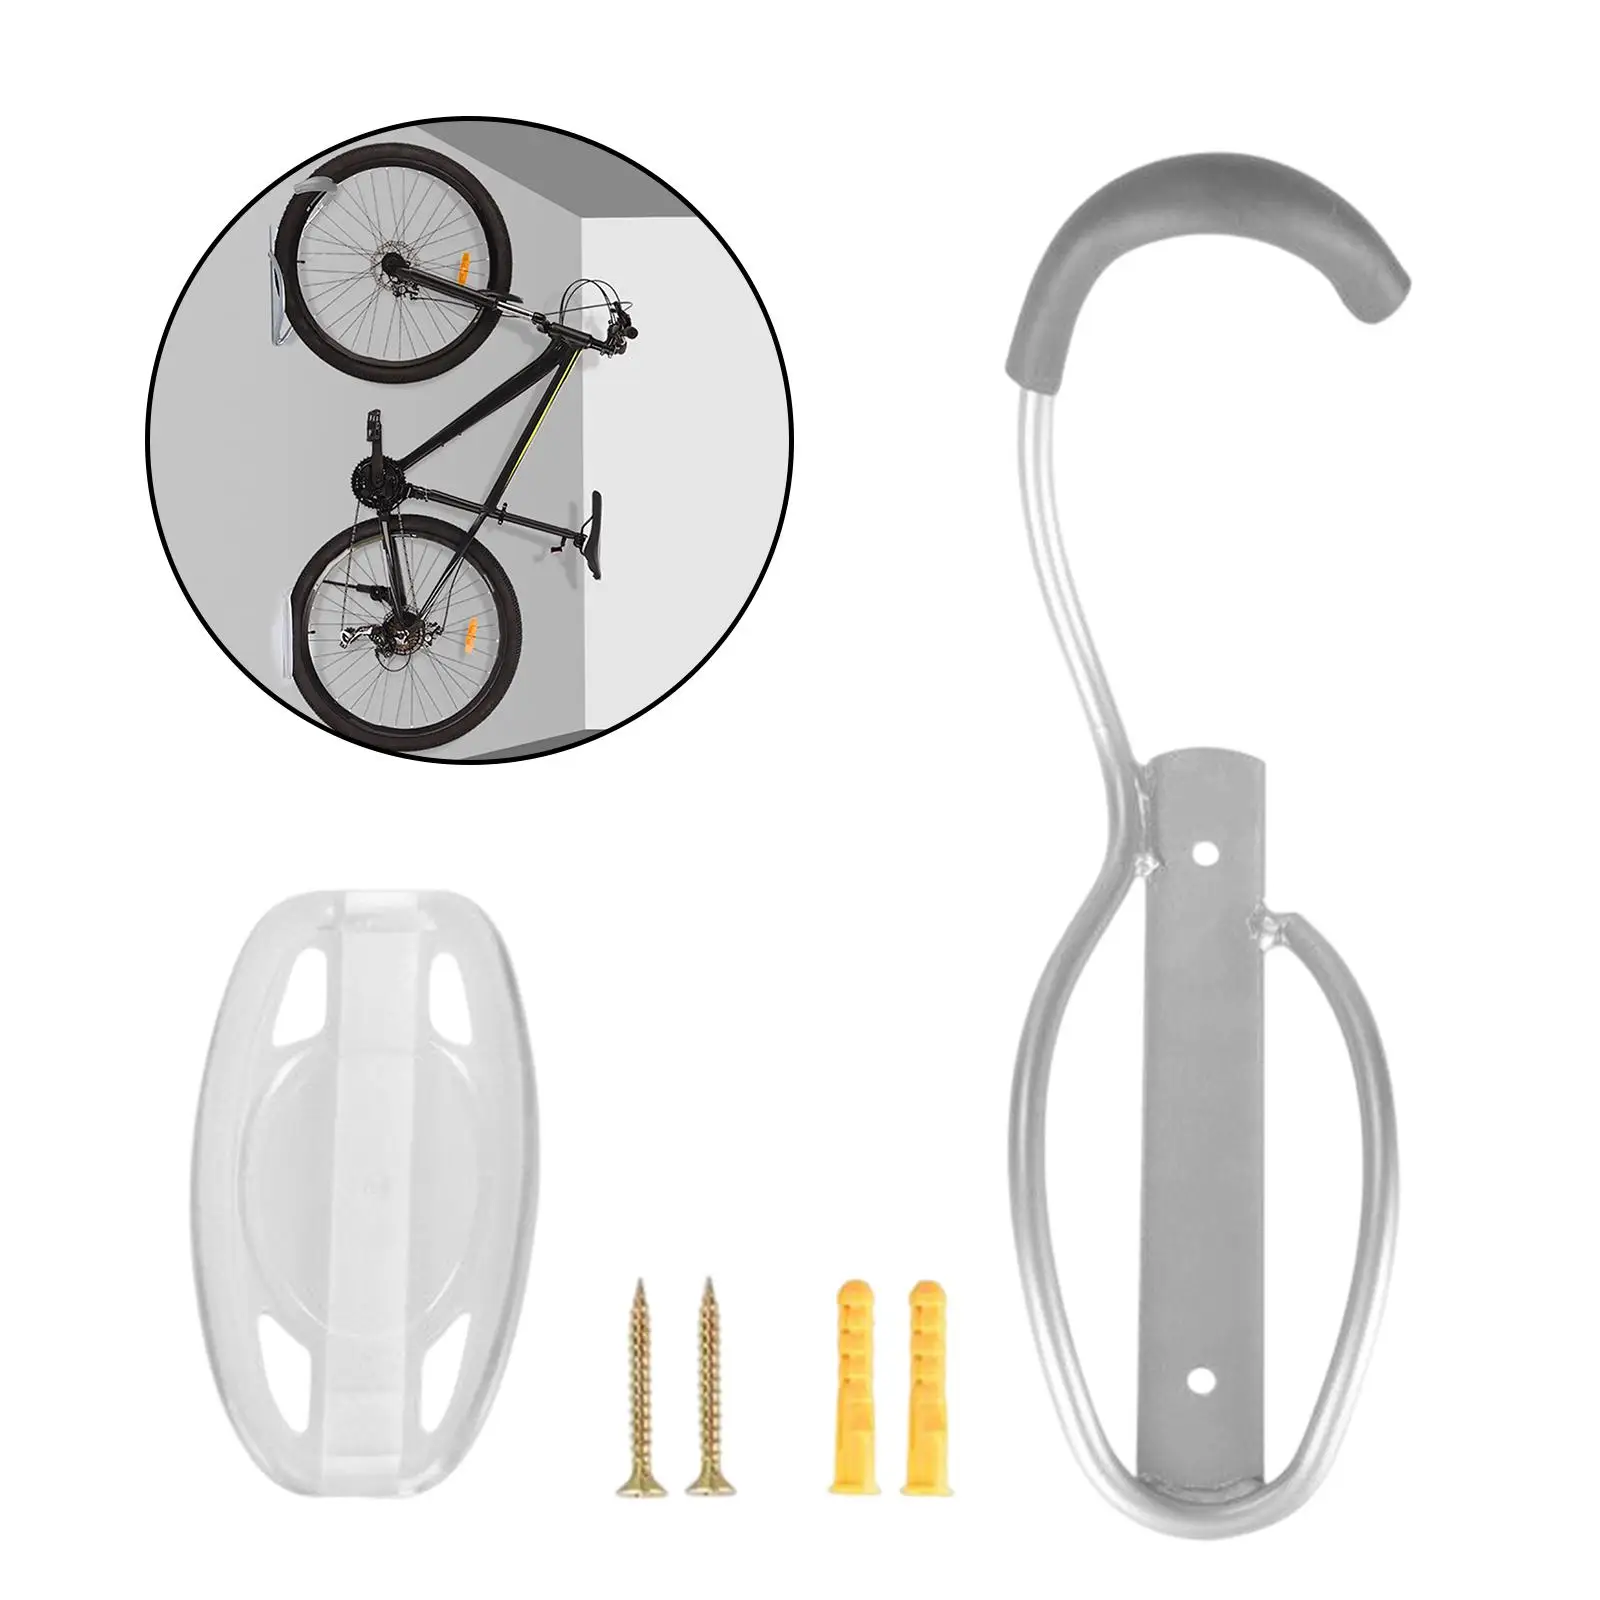 Bike Stand Storage Holder Wall Hanger for Indoor Road Bicycle Folding Bikes Apartment